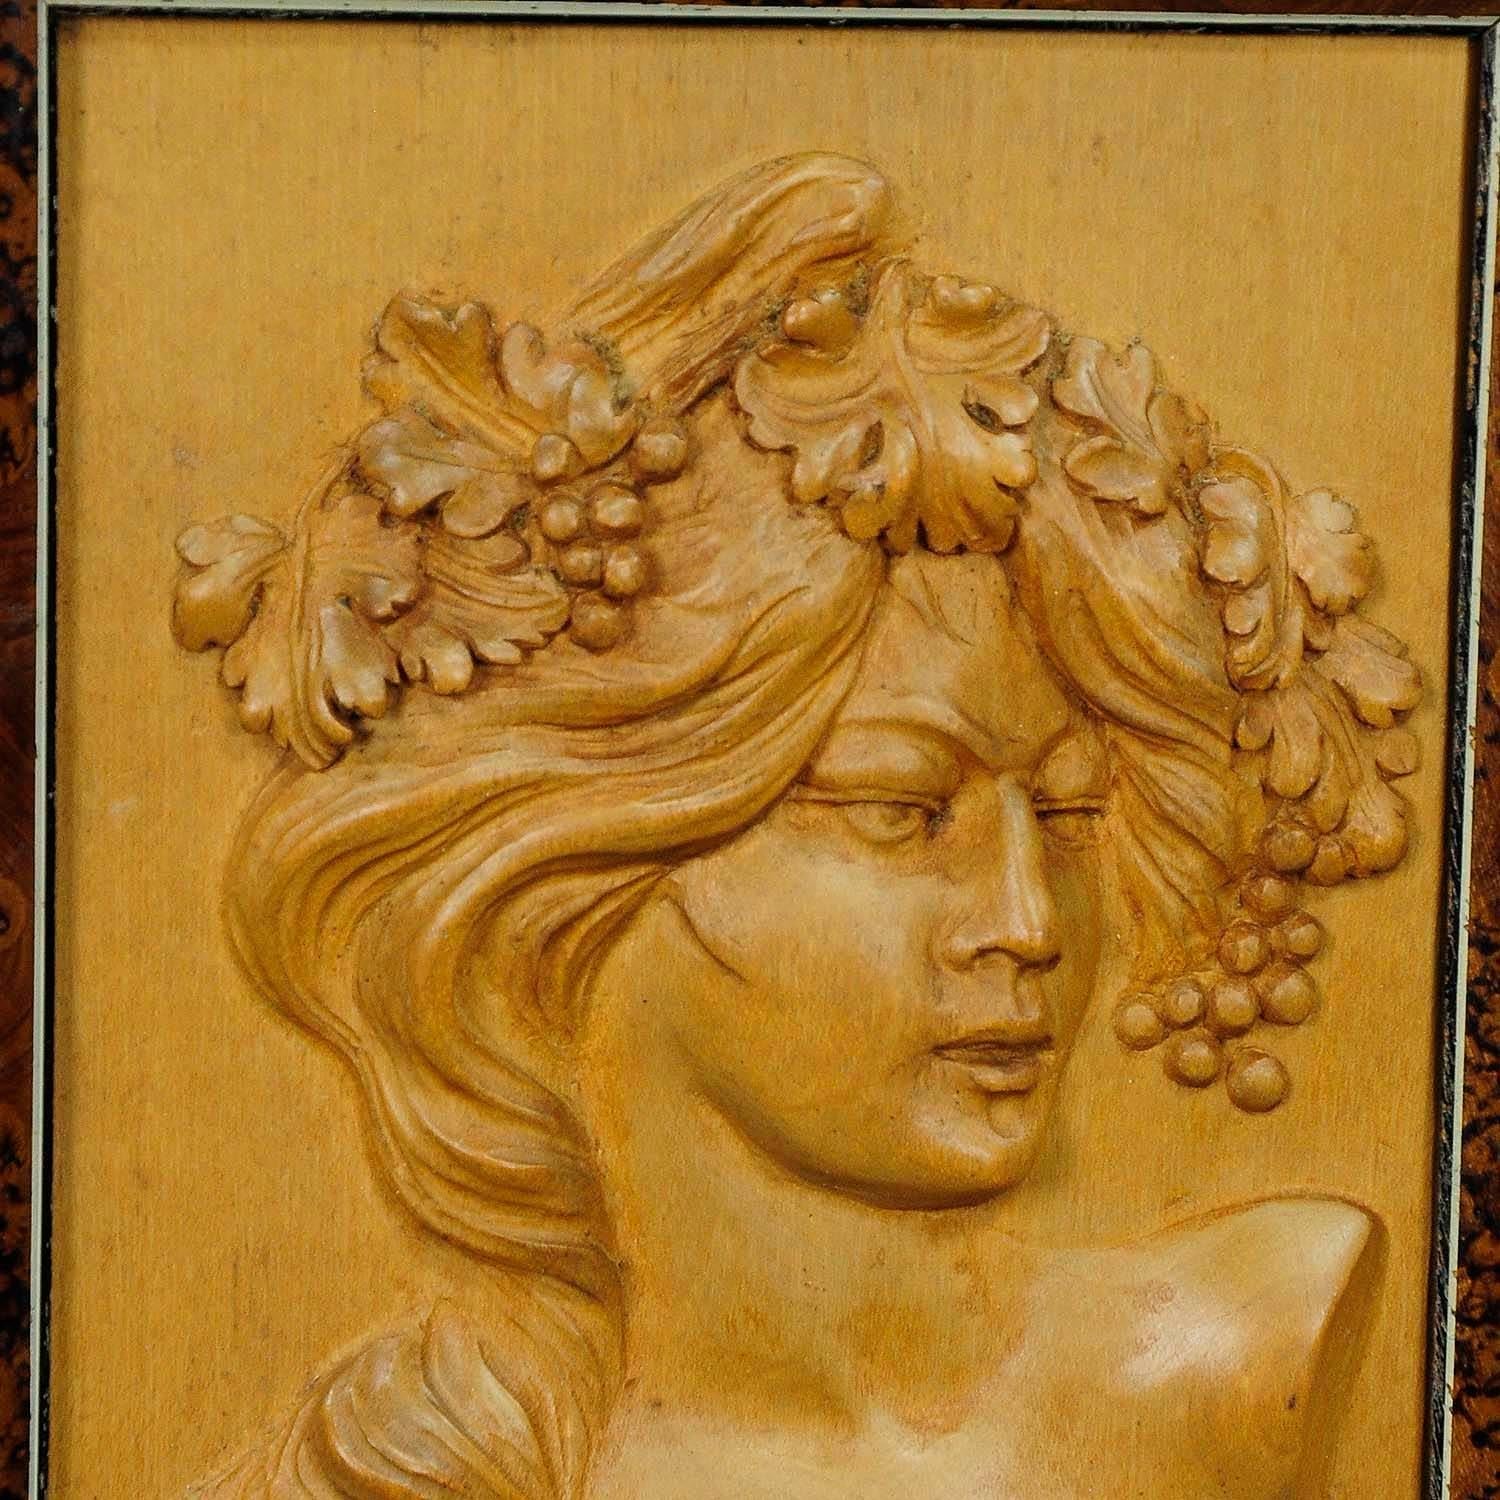 A lovely wooden wall application depicting a Victorian lady with grapes and wine leaves in her hair. Handcarved circa 1920 in Germany.
Measures: width: 5.71